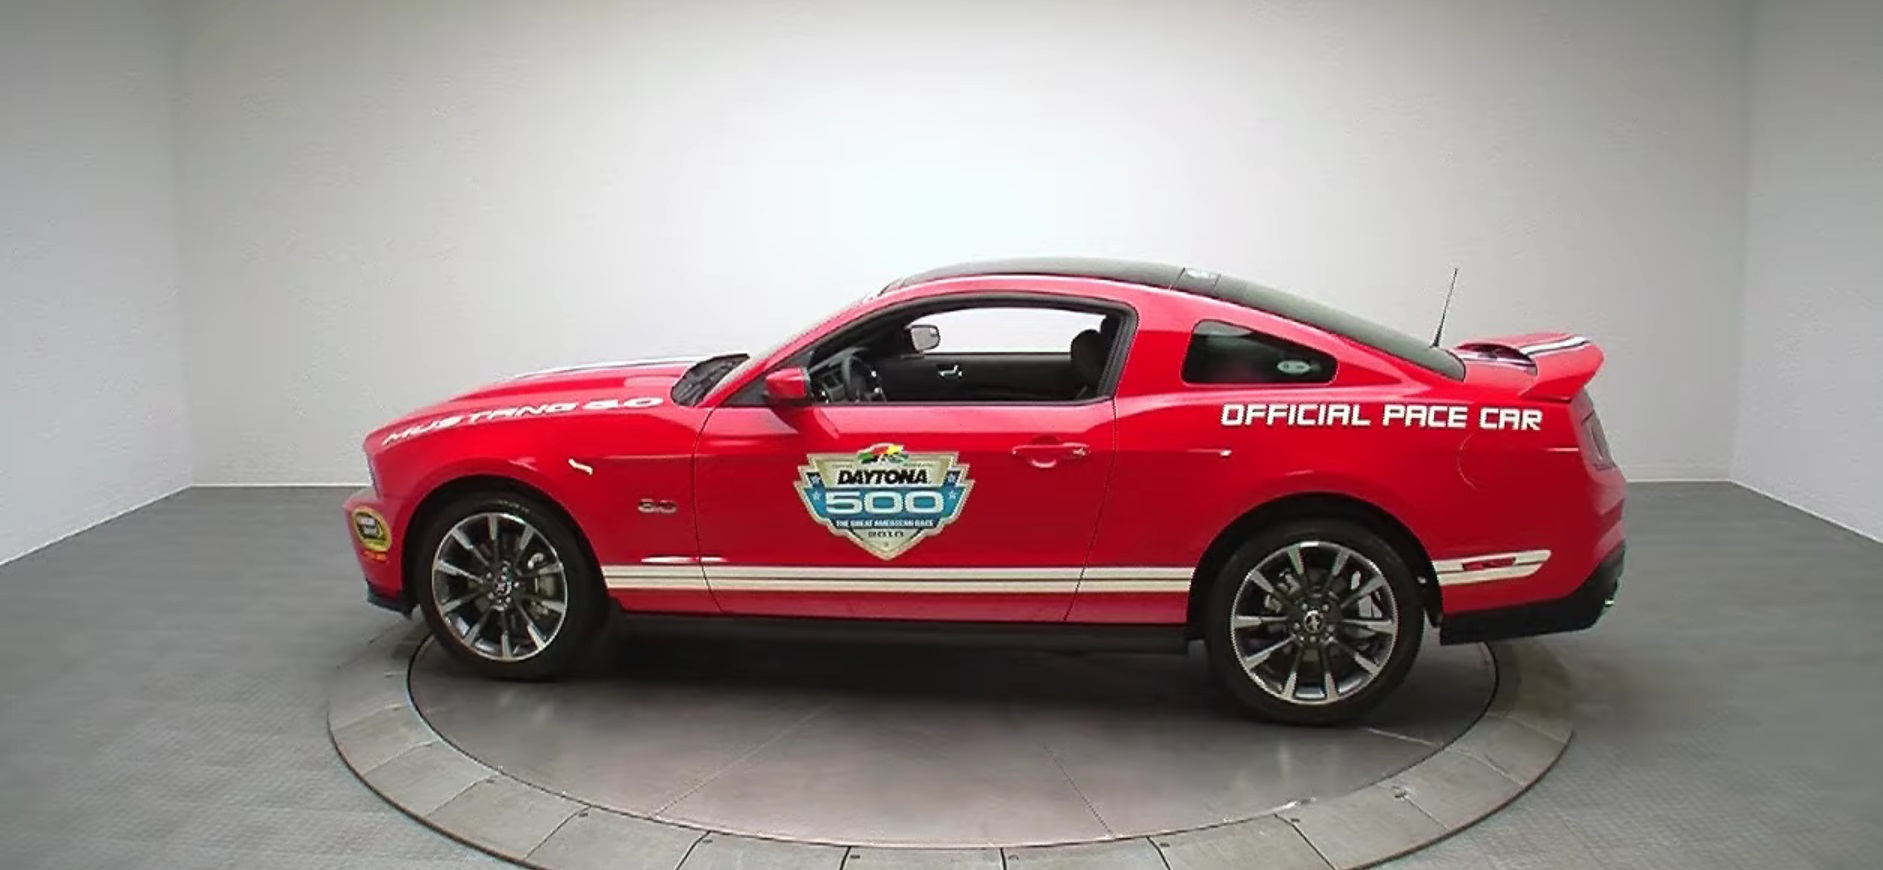 Video: 2011 Ford Mustang GT Pace Car Overview